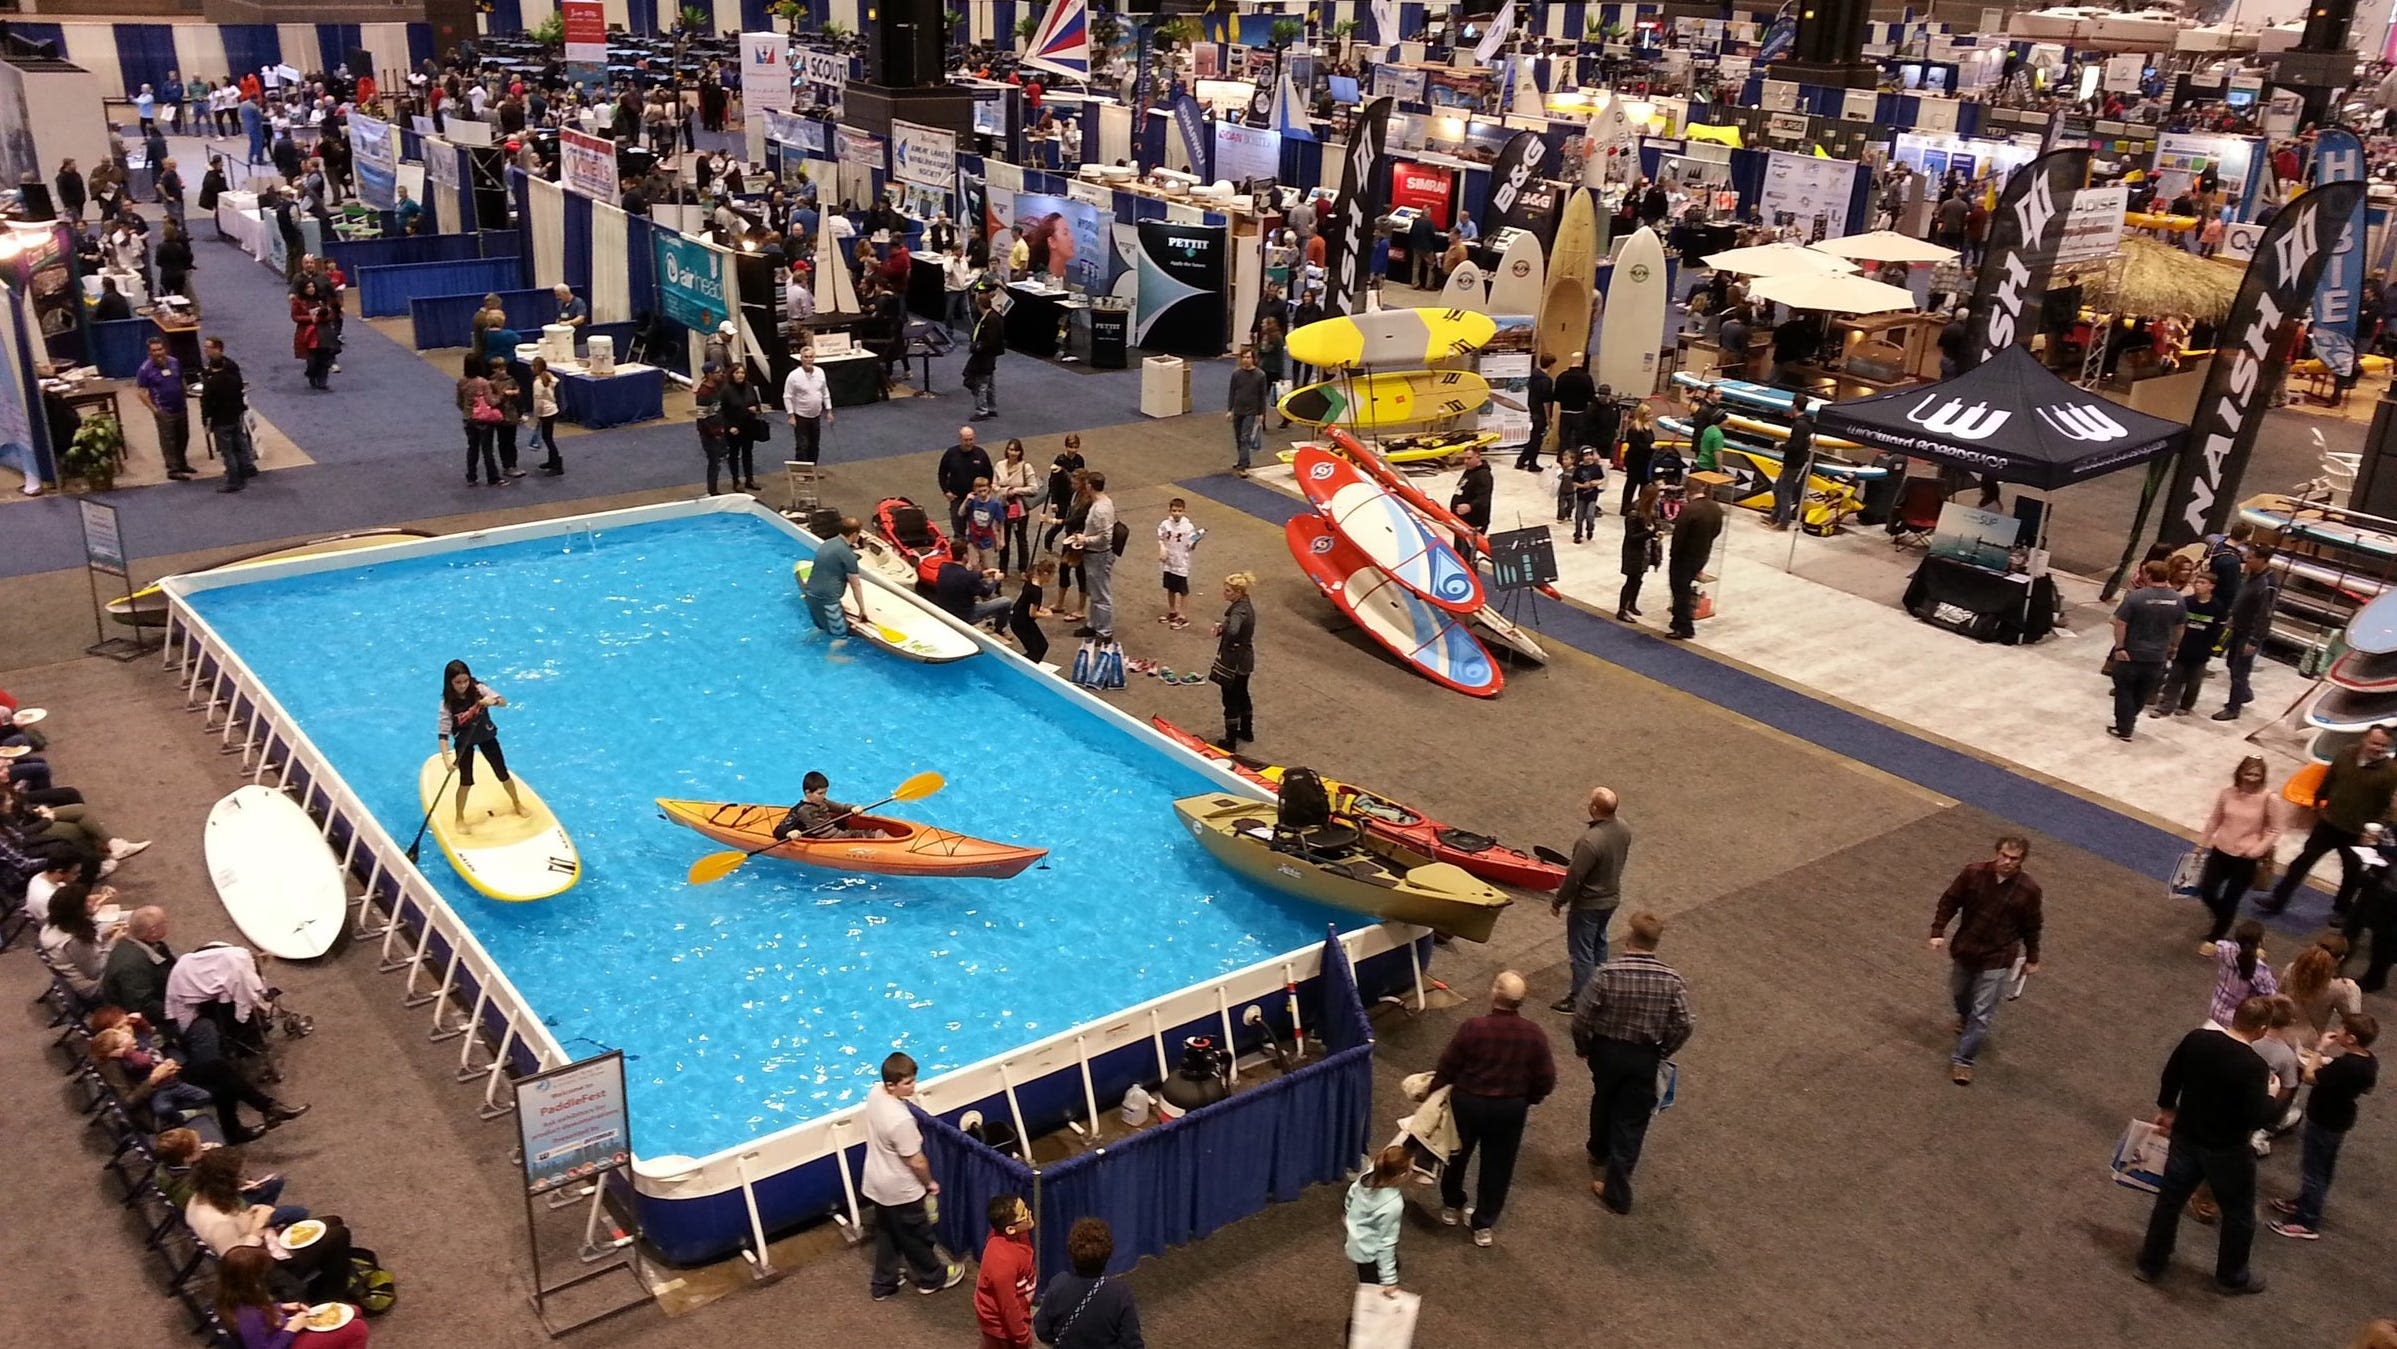 Boat show in Illinois voted one of the best in the country in USA TODAY poll